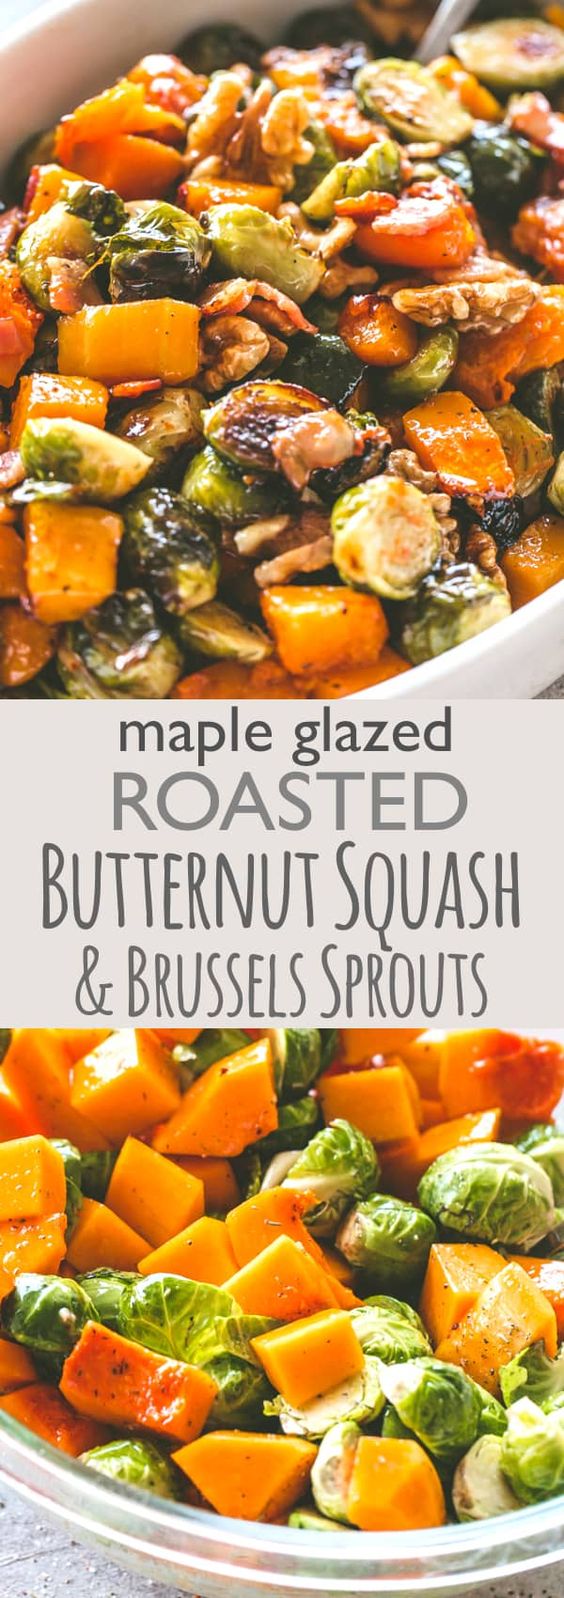 Maple Glazed Roasted Butternut Squash with Brussels Sprouts - A perfect side dish for your Holiday meals prepared with roasted Butternut Squash and Brussels Sprouts coated with a delicious maple…